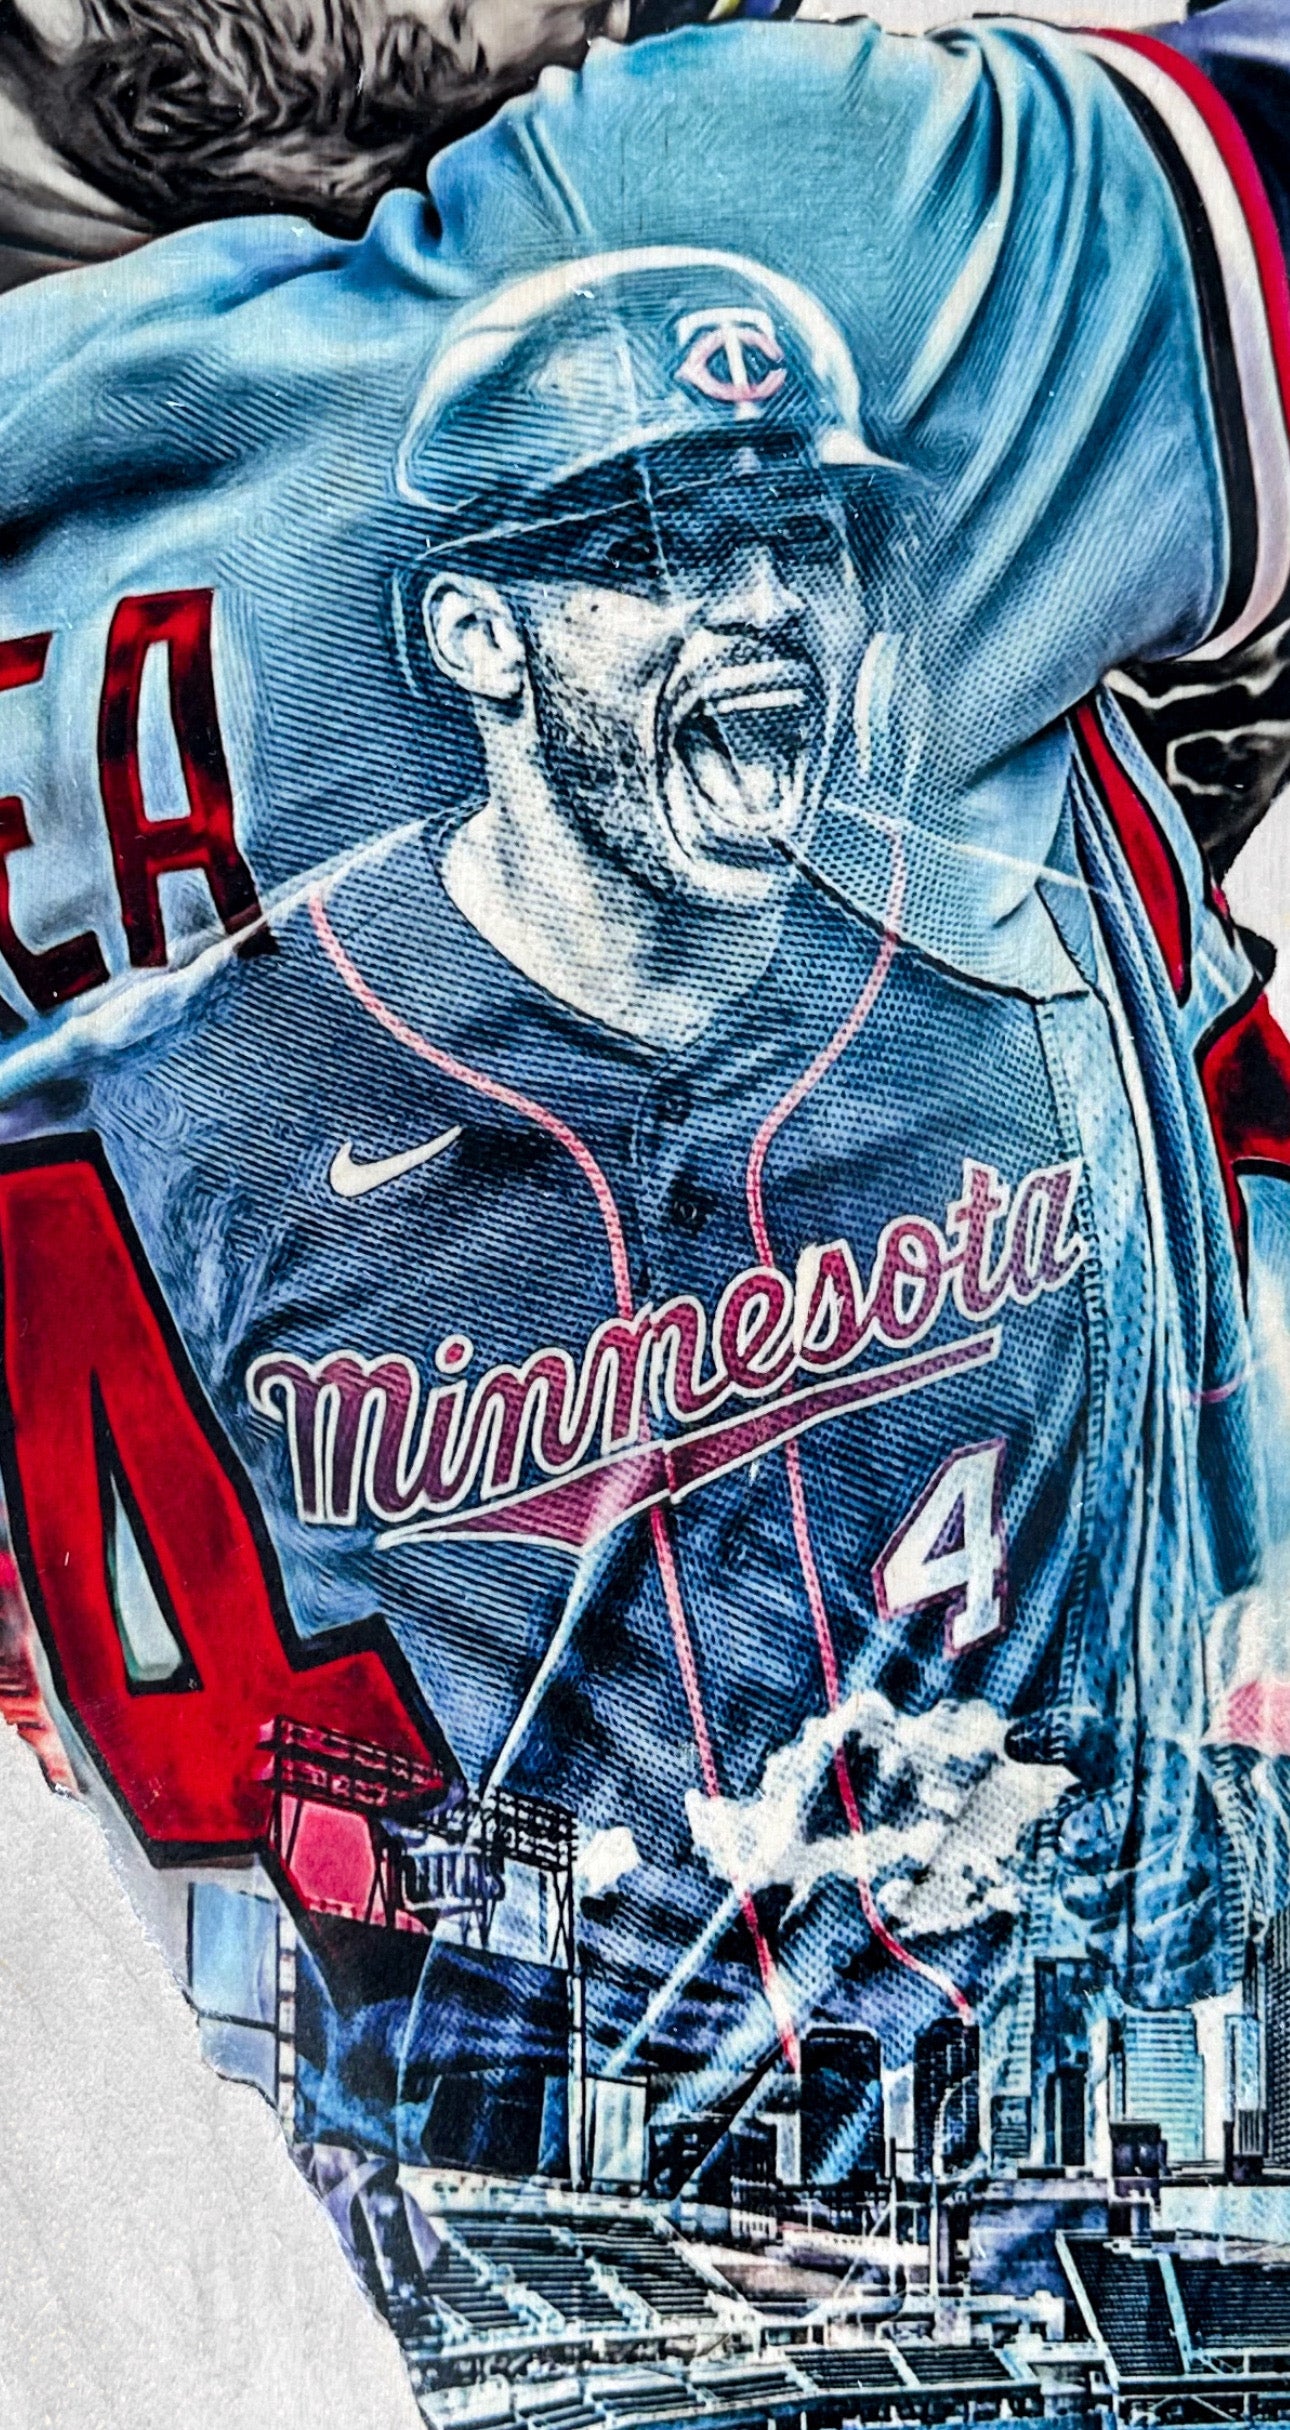 "C4" (Carlos Correa) Minnesota Twins - Officially Licensed MLB Print - Limited Release /500